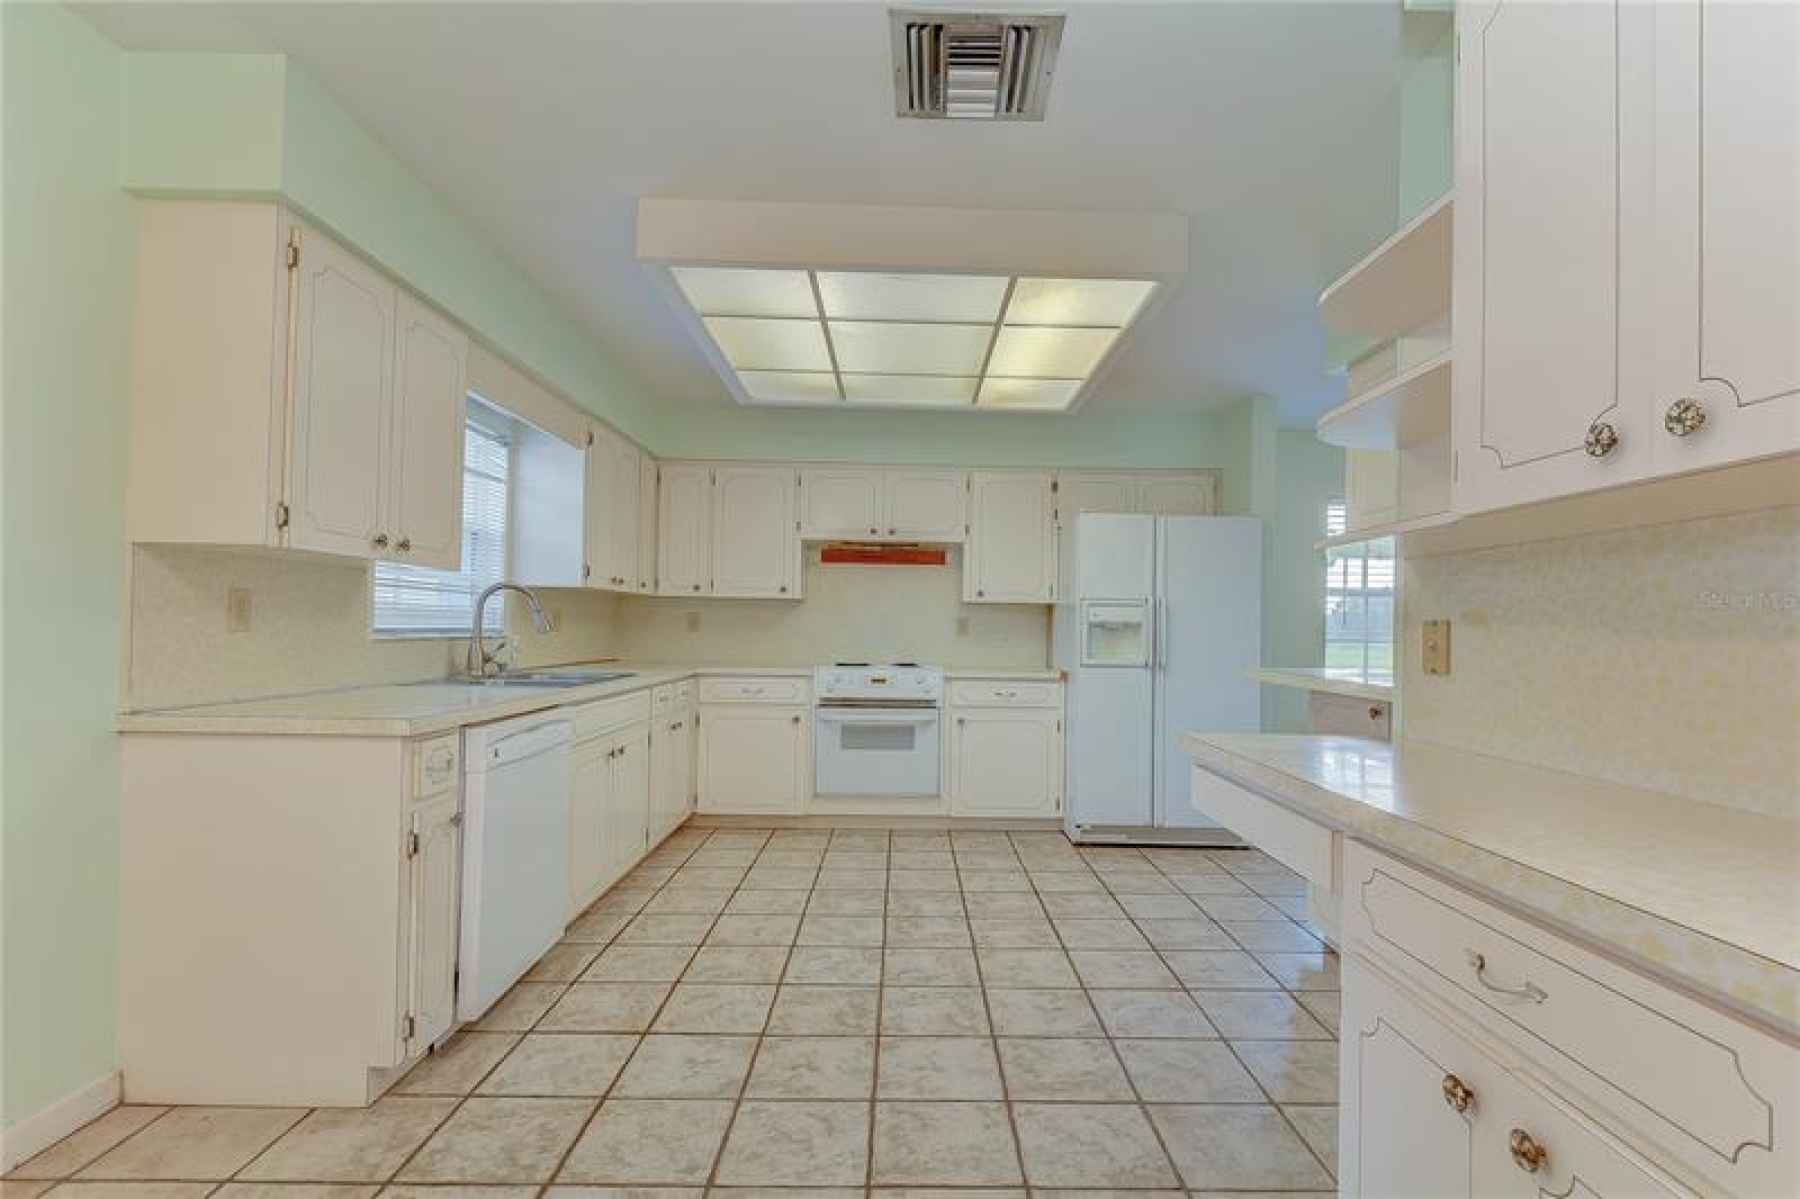 The chef in the family is sure to fall in love with this kitchen!